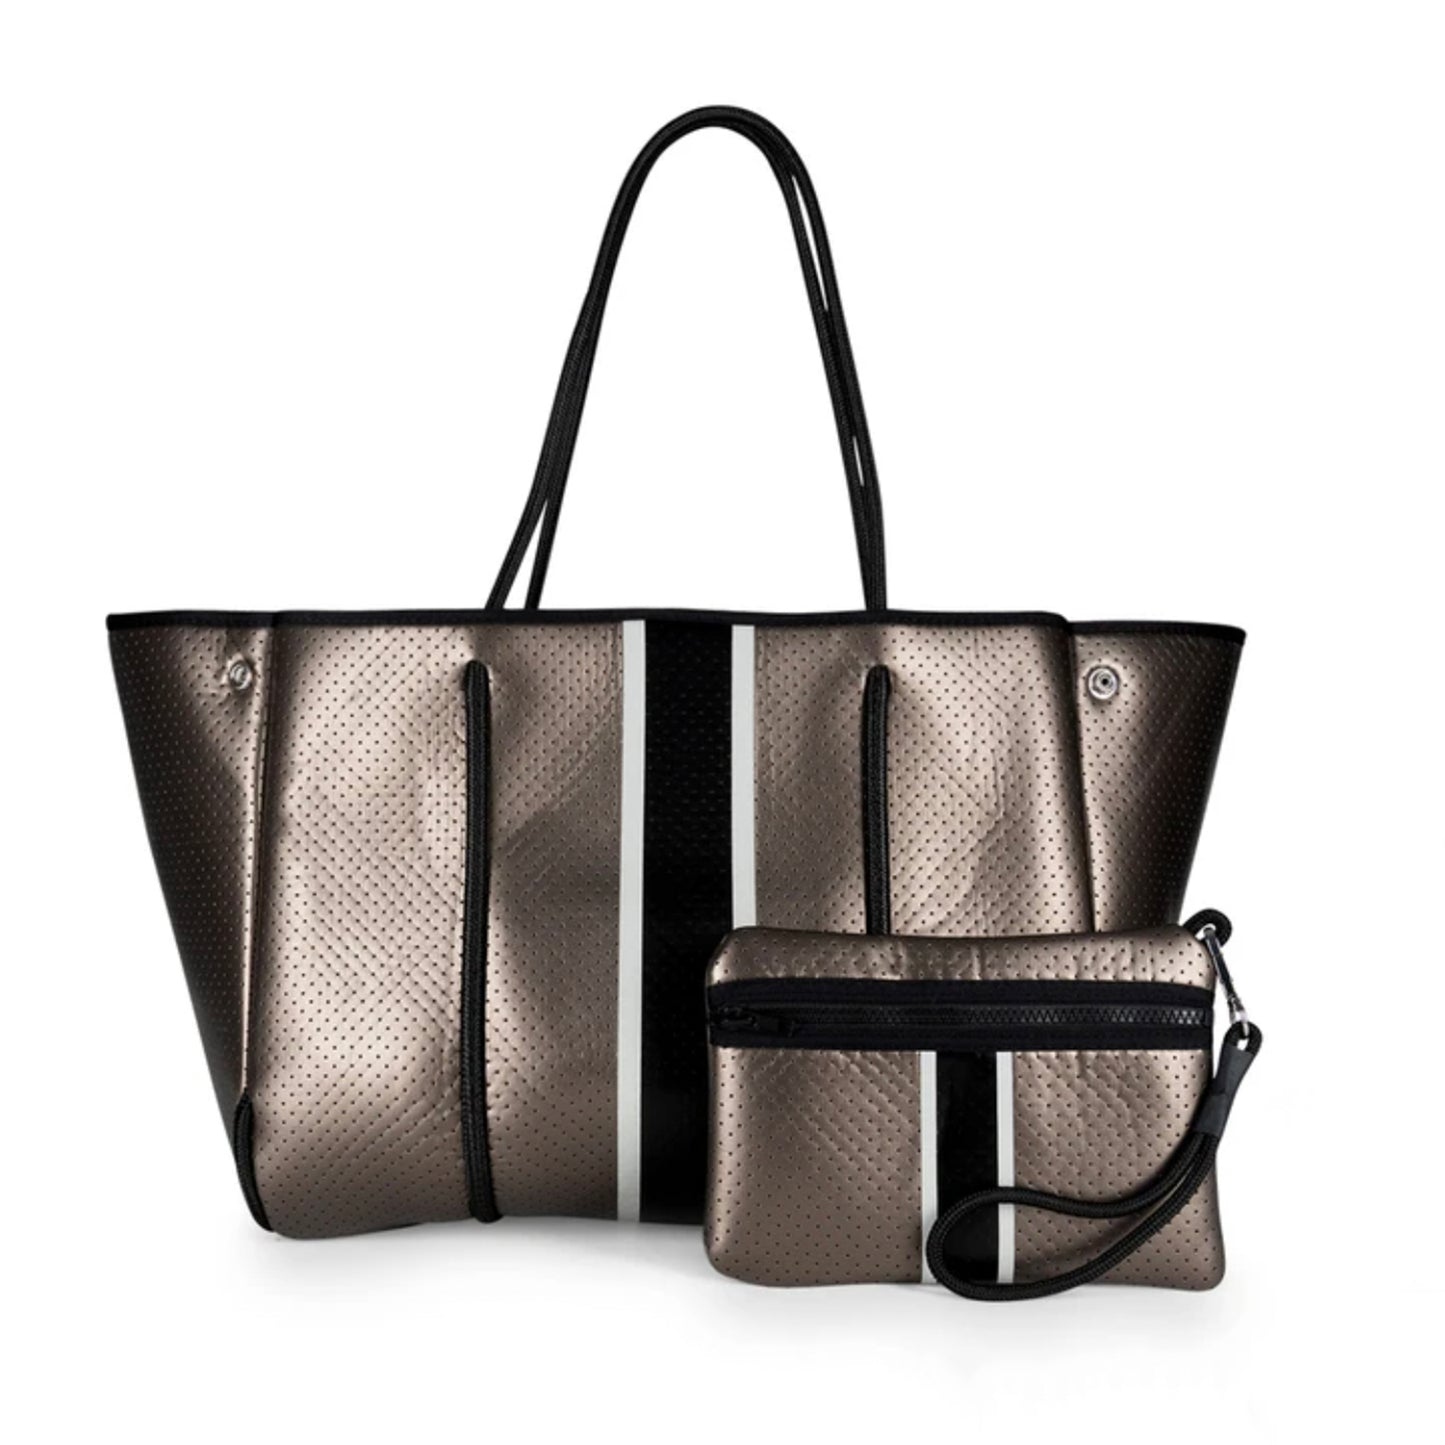 Haute Shore Greyson Tote Ritz. The Greyson tote is a certified favorite everyday tote! Designed to last, this neoprene tote is the perfect mixture of luxury, style, and functionality to take on the go! The best bag you will ever own!